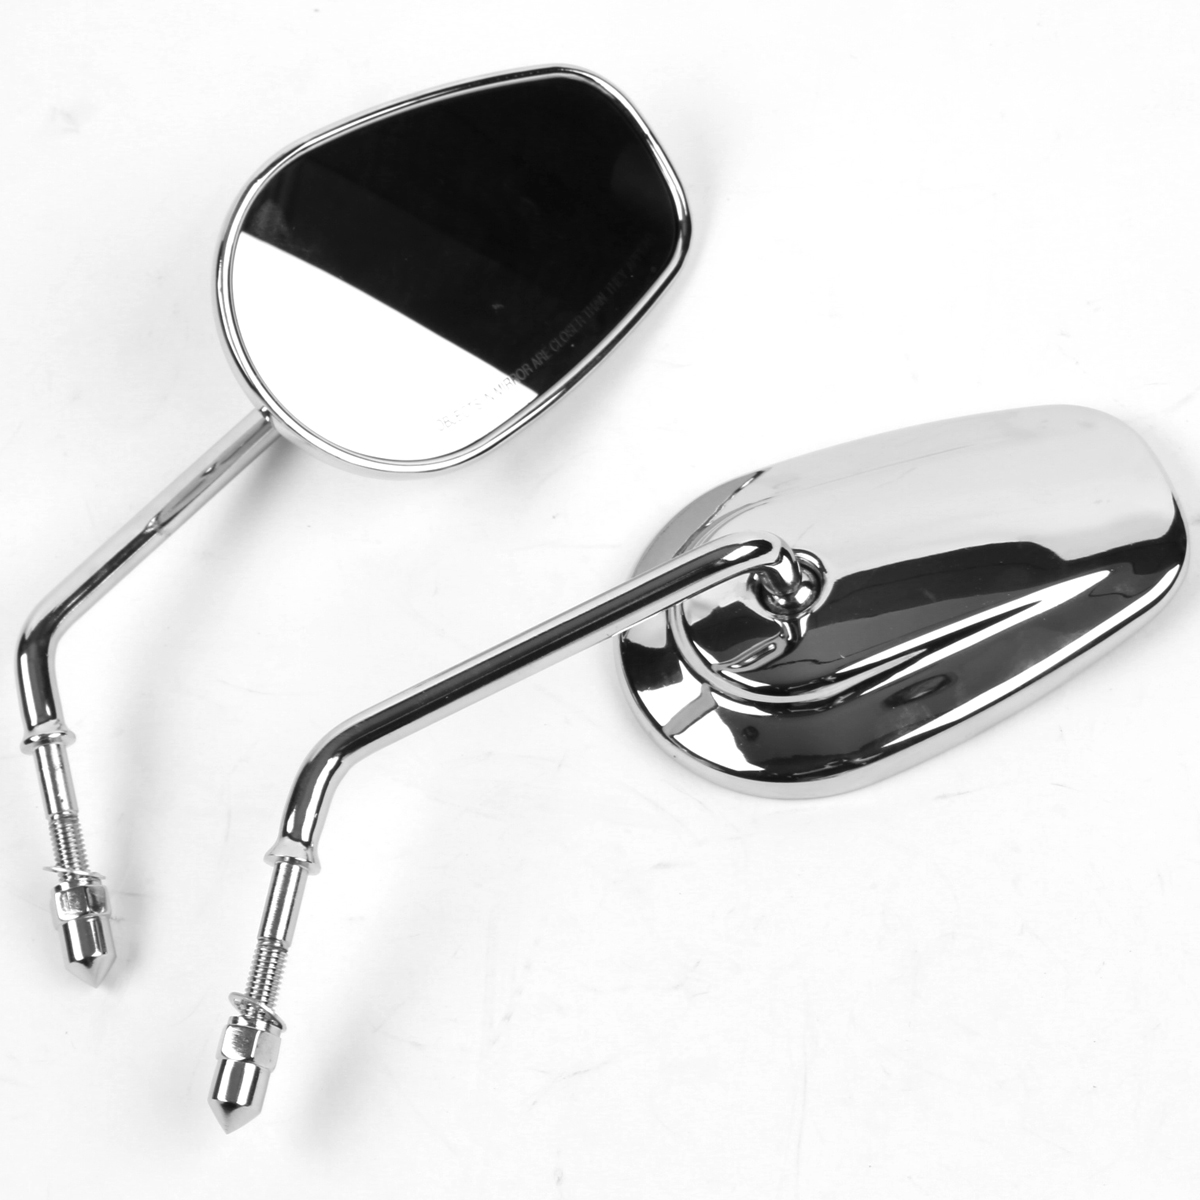 Motorcycle Flame Mirror Mirrors For Harley Dyna Electra Glide Sportster 1200 883